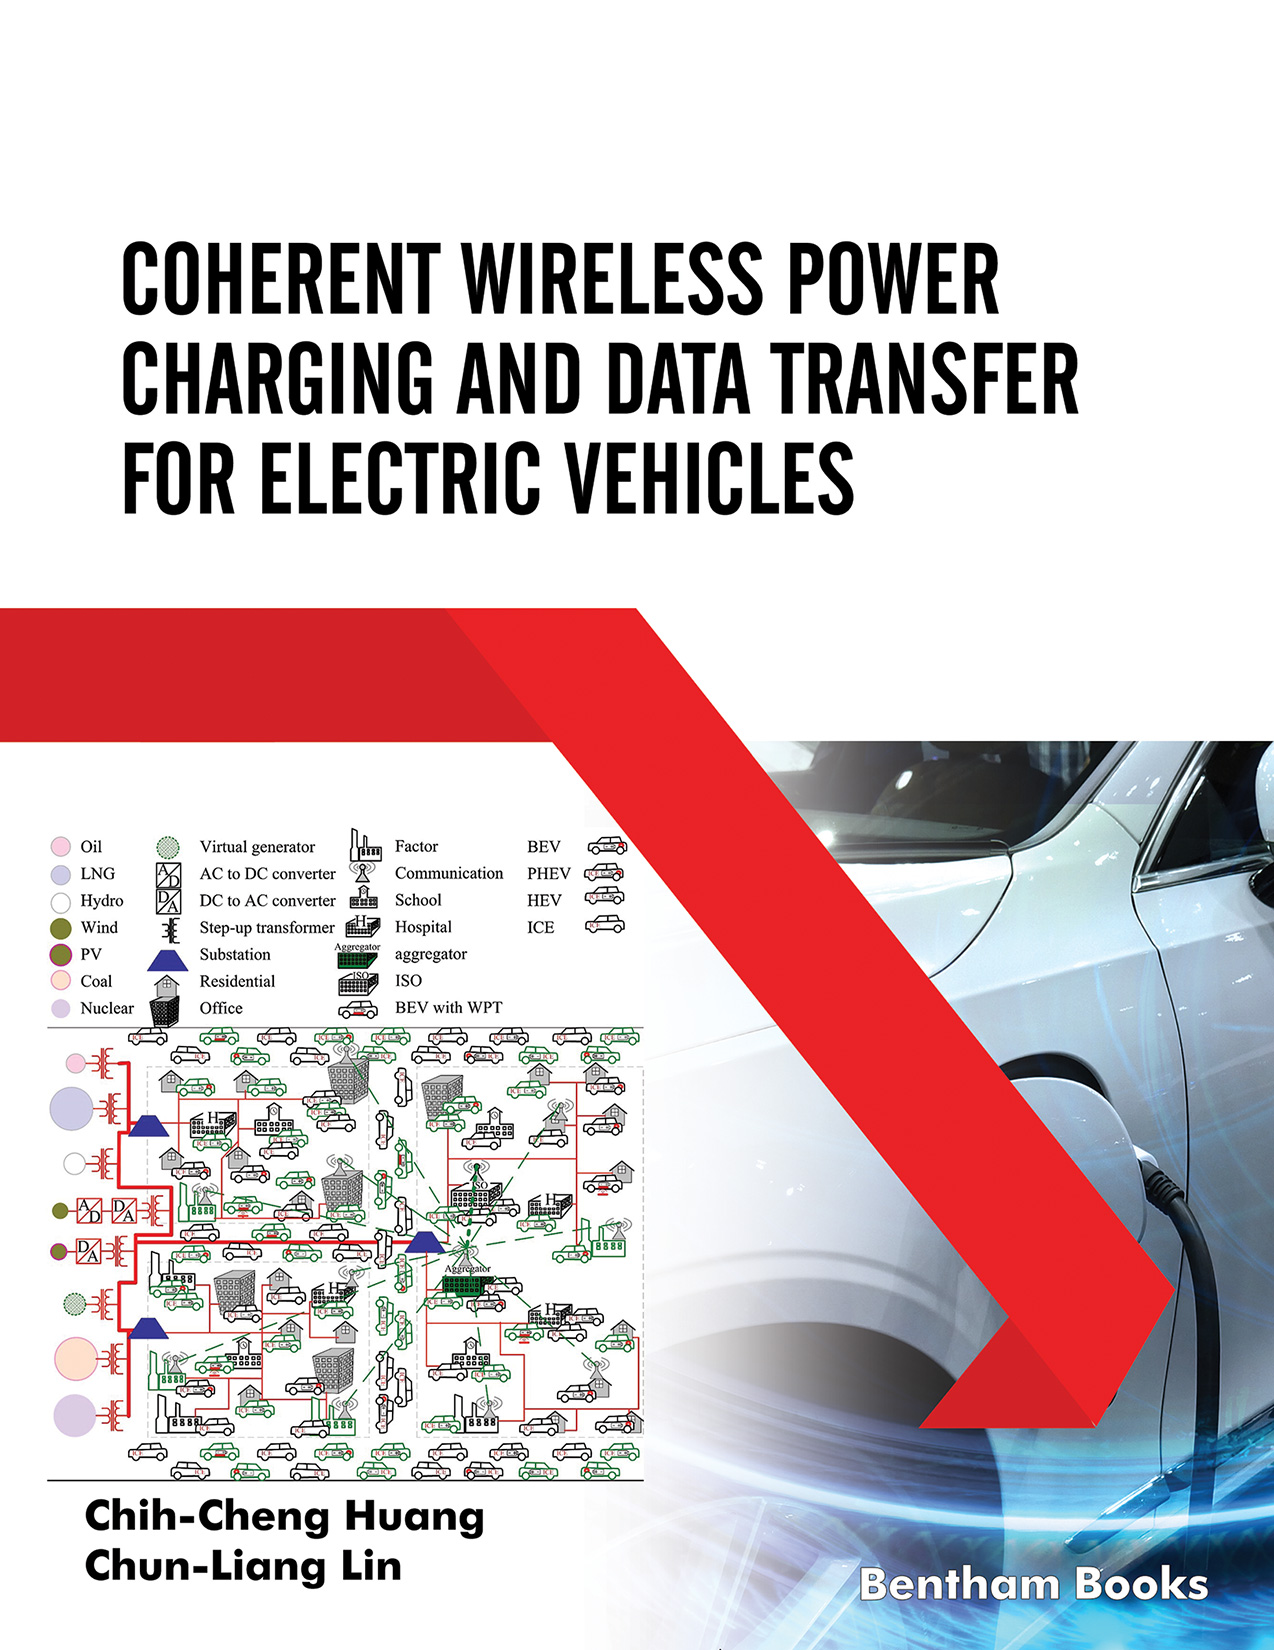 Coherent Wireless Power Charging and Data Transfer for Electric Vehicles